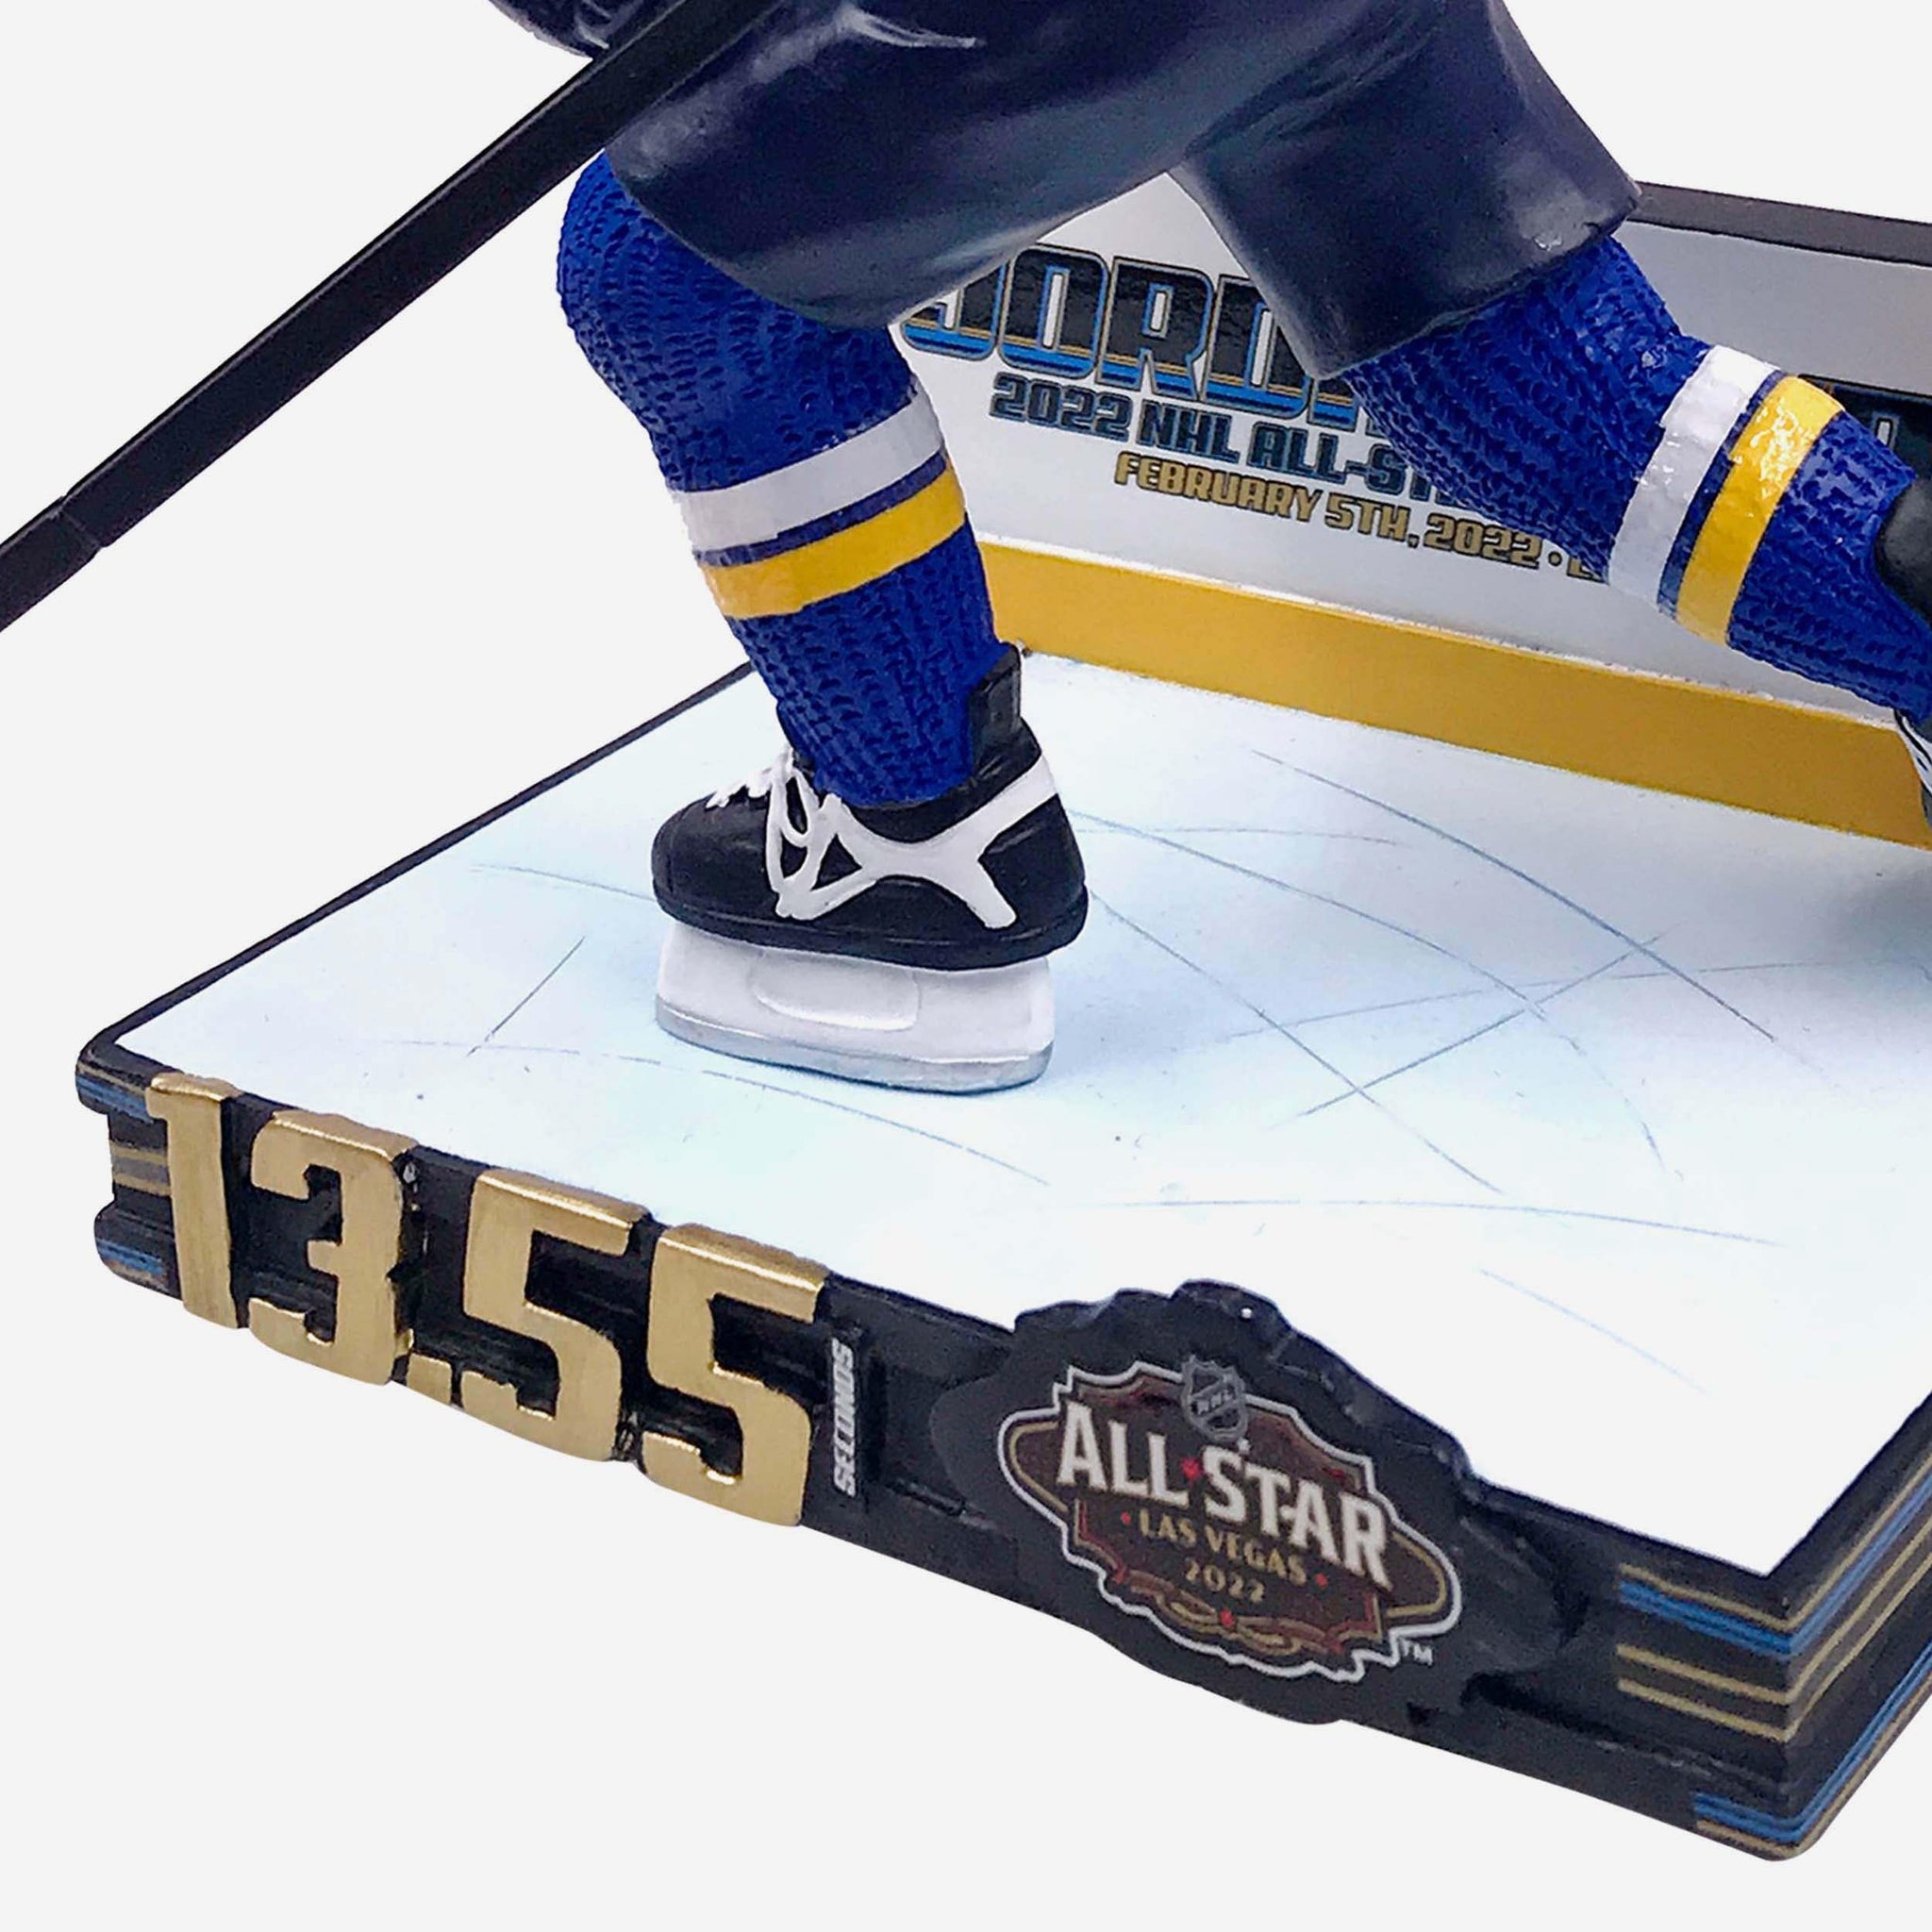 Send your favorite Blues to the 2022 NHL All-Star Game